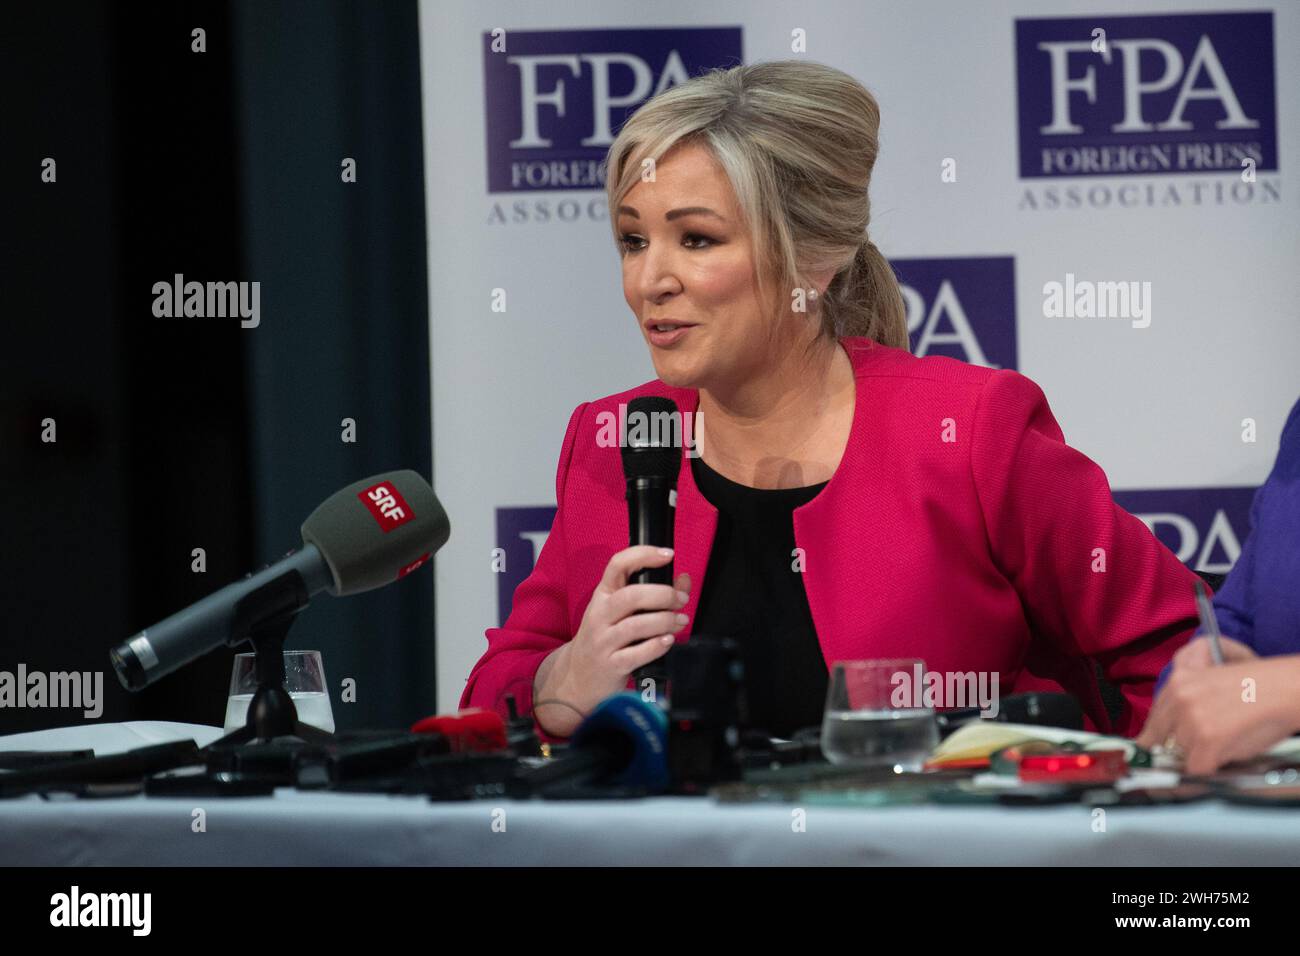 London, UK. 08 Feb 2024. Pictured: Newly elected Northern Ireland First Minister Michelle O'Neill speaks at a press conference organised by the The Foreign Press Association at The Royal Over-Seas League. Credit: Justin Ng/Alamy Stock Photo